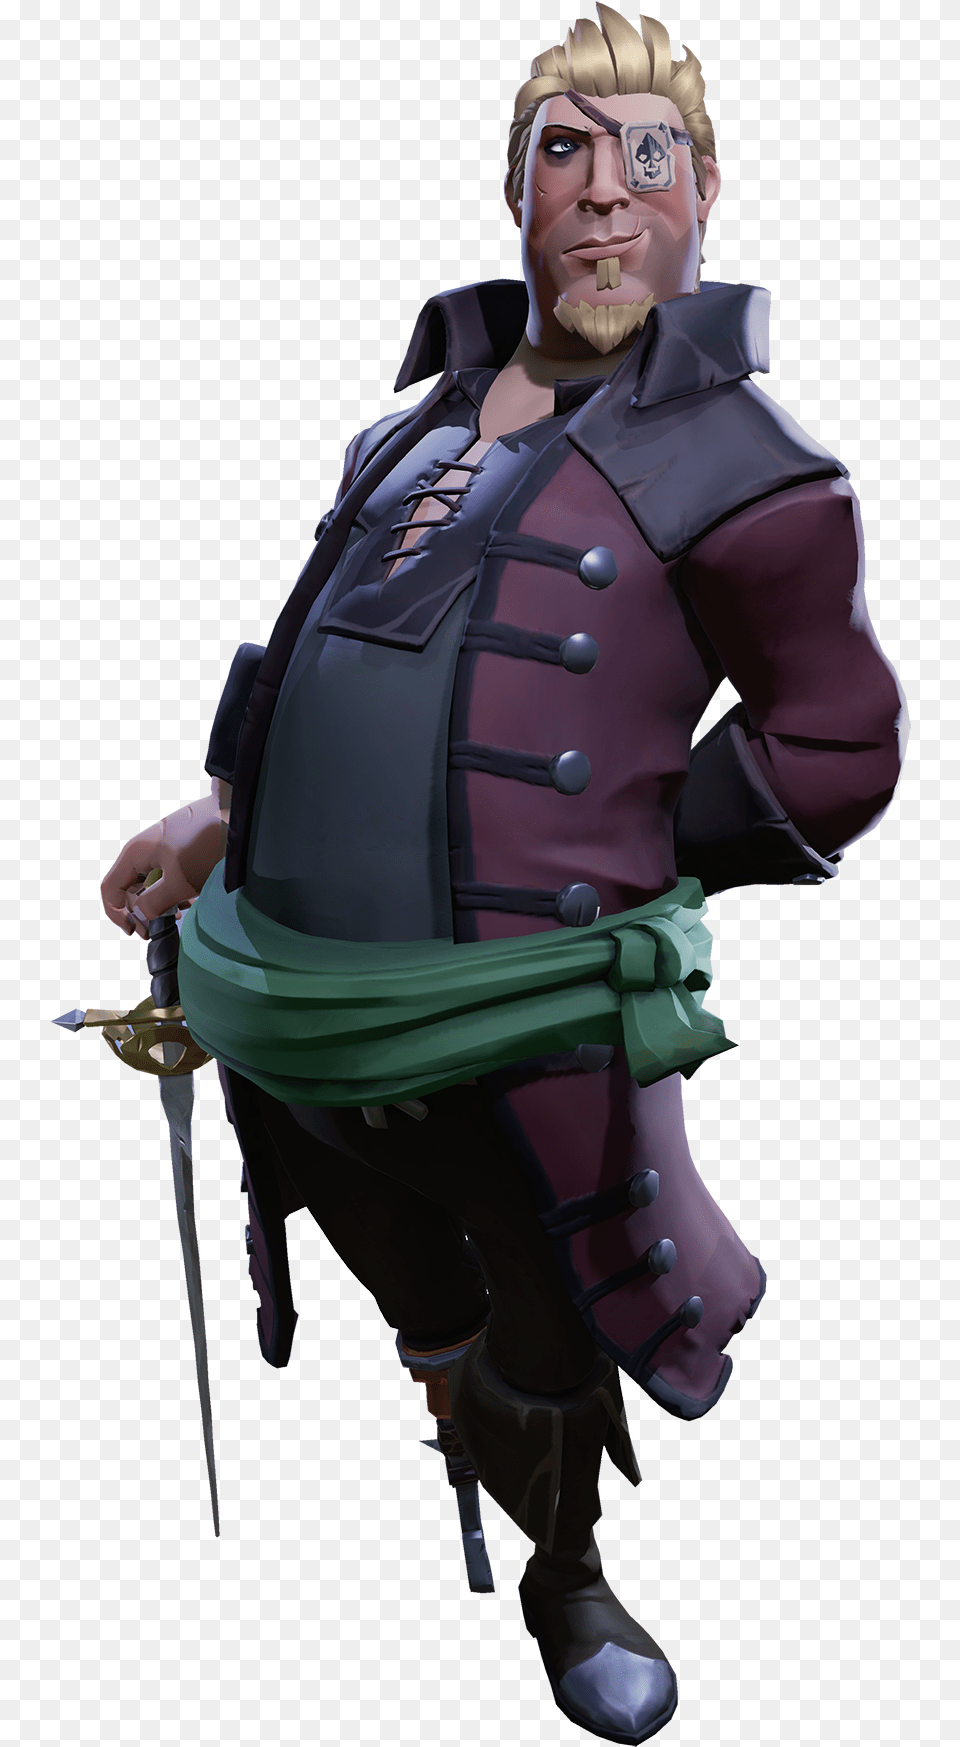 Pirate, Sword, Weapon, Adult, Male Png Image